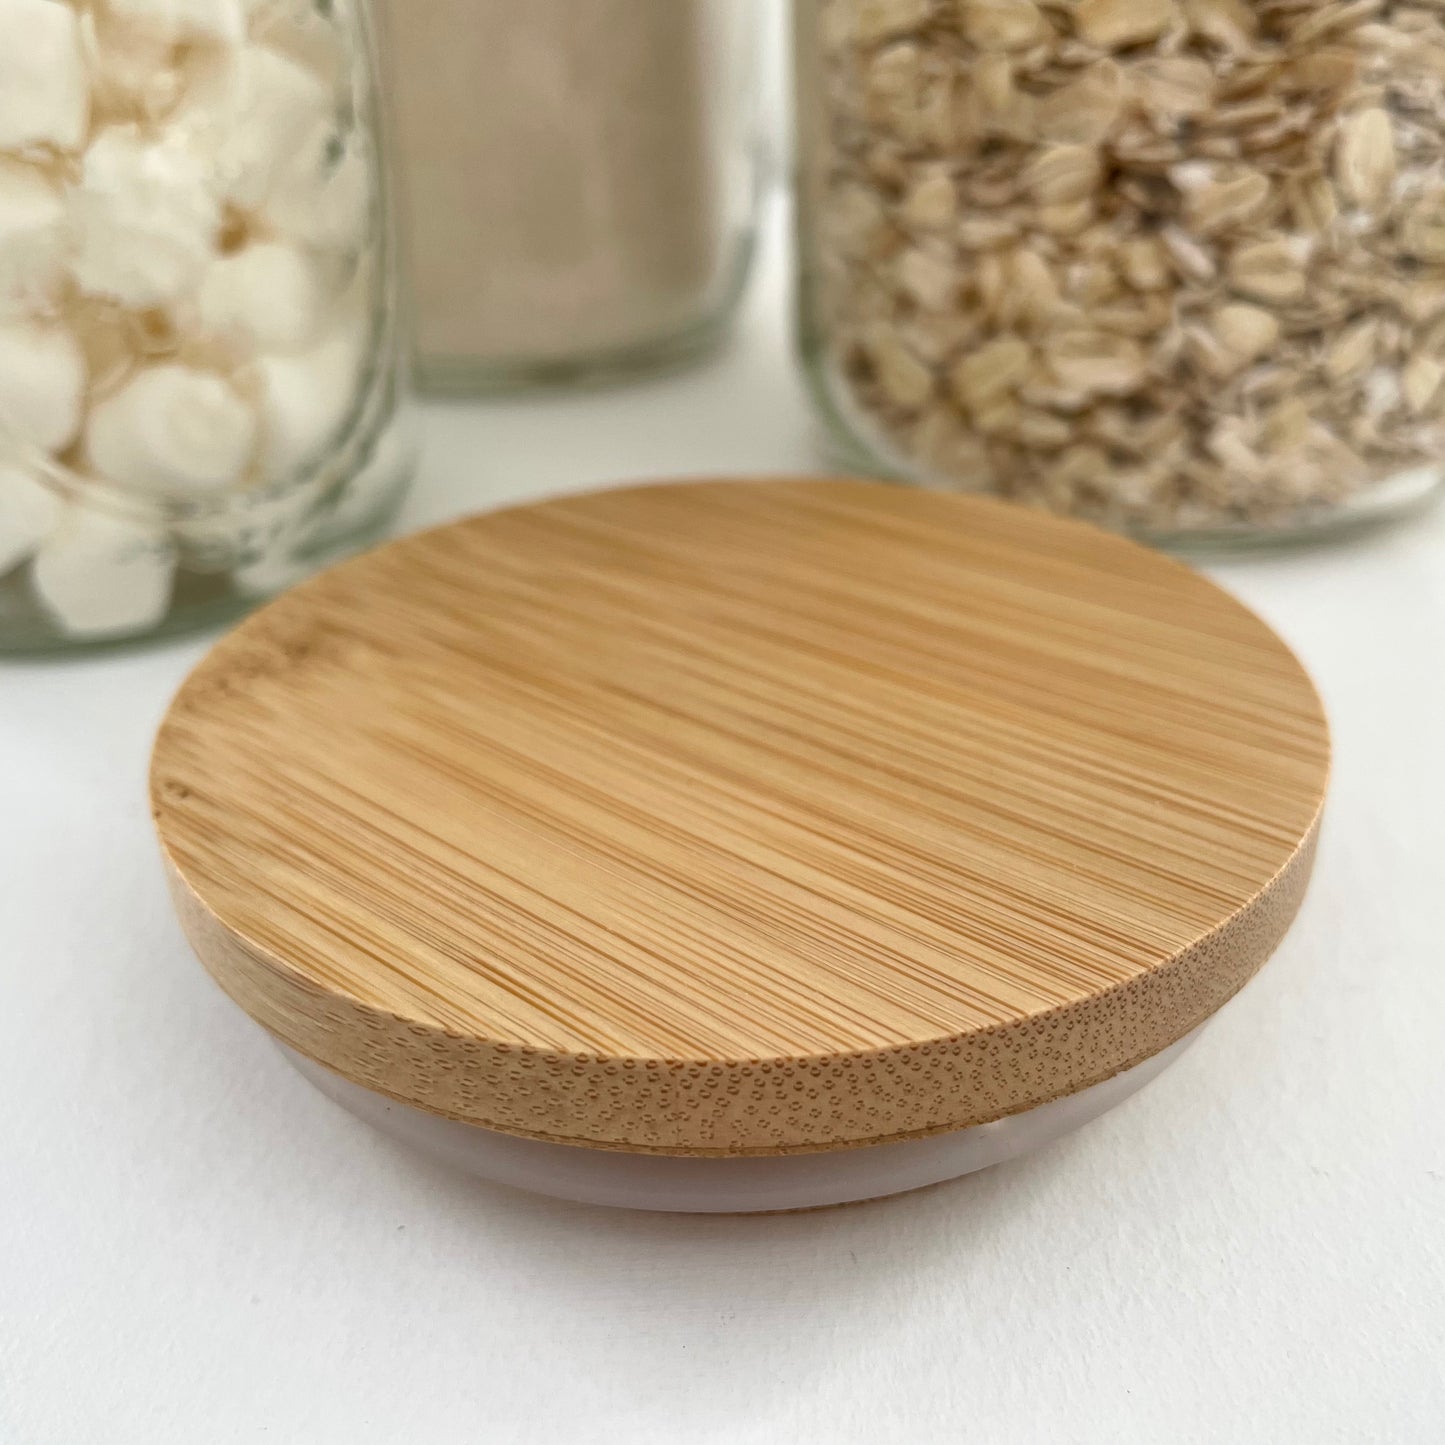 sustainable bamboo wide mouth mason jar canning lid for organizing pantry